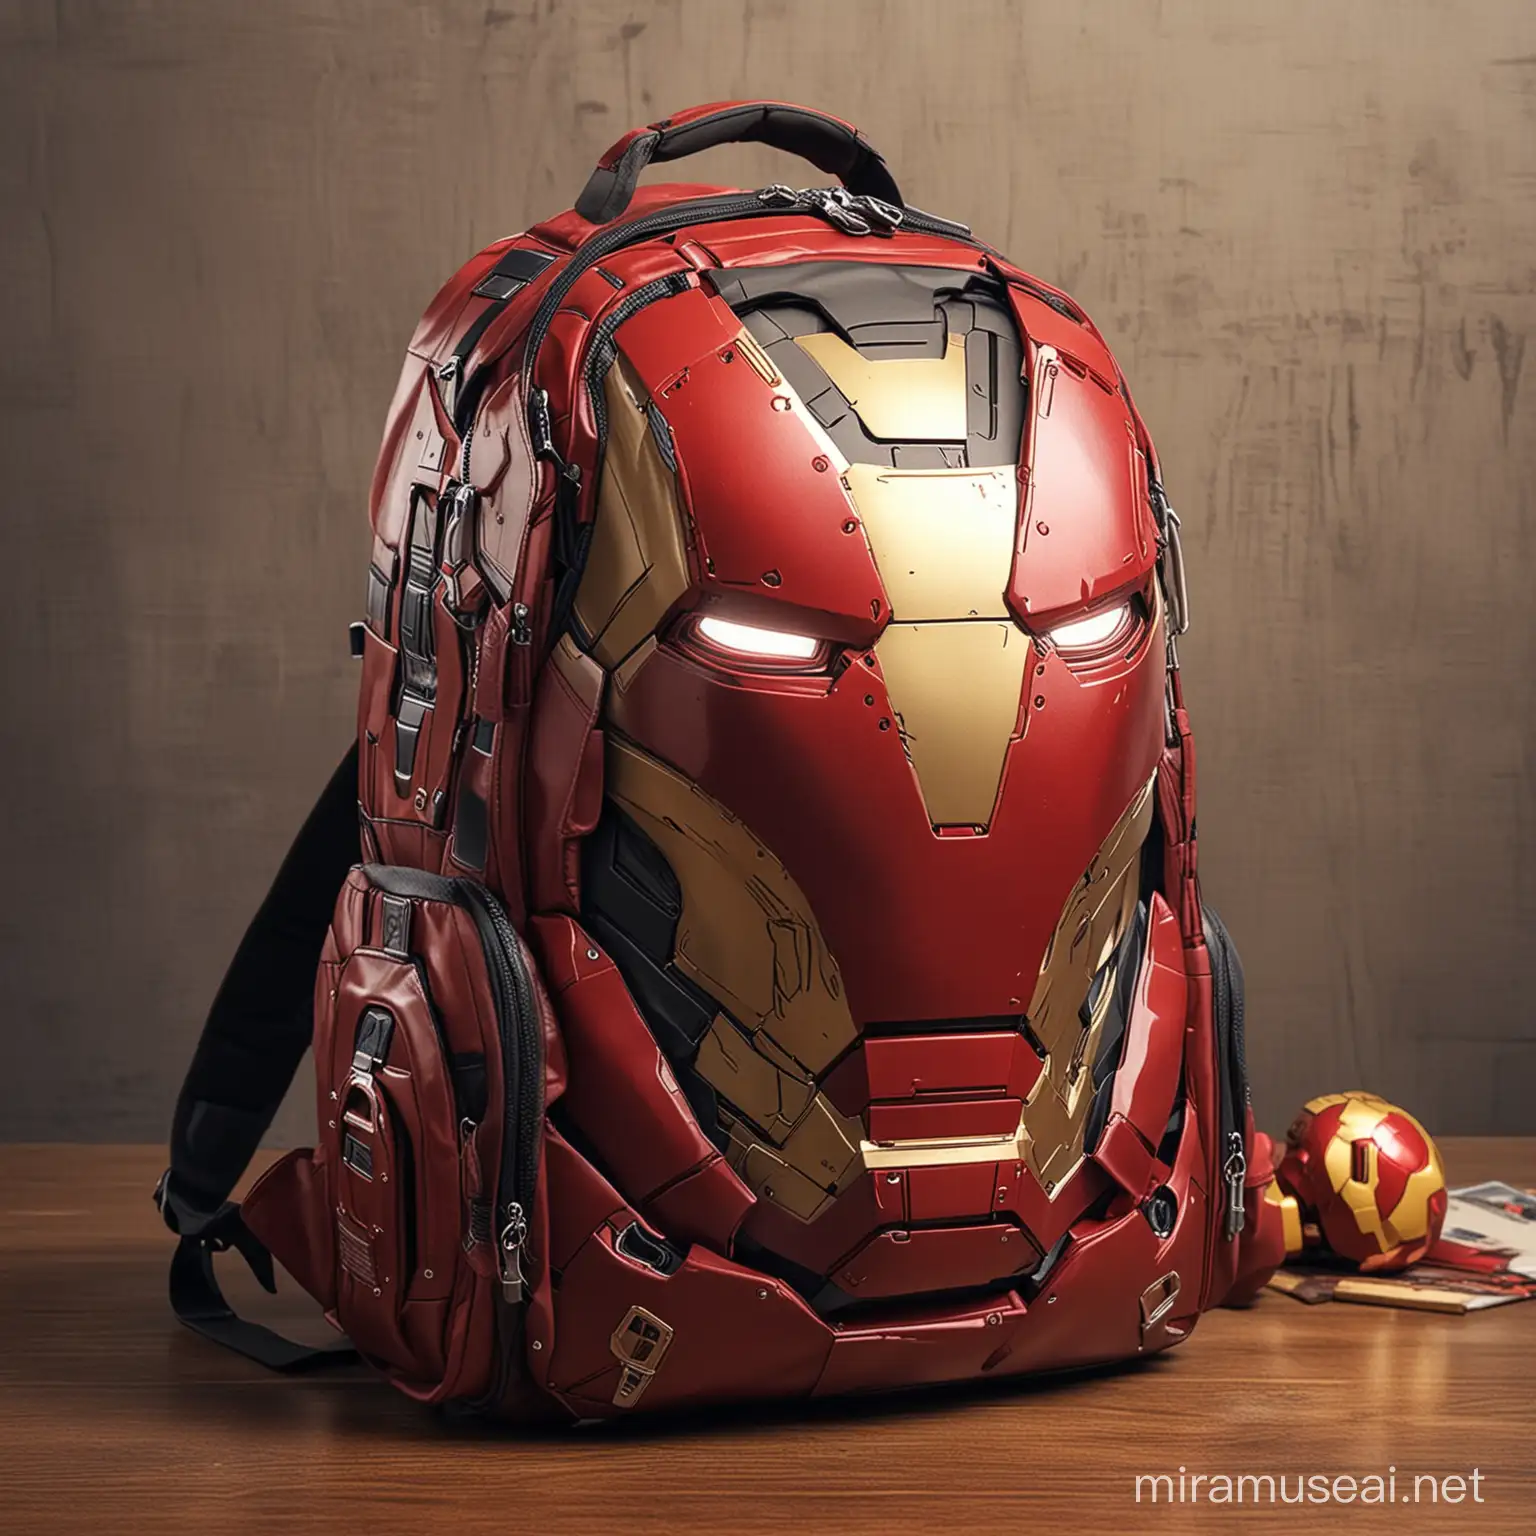 Modern Iron Man Style Backpack Displayed on Table